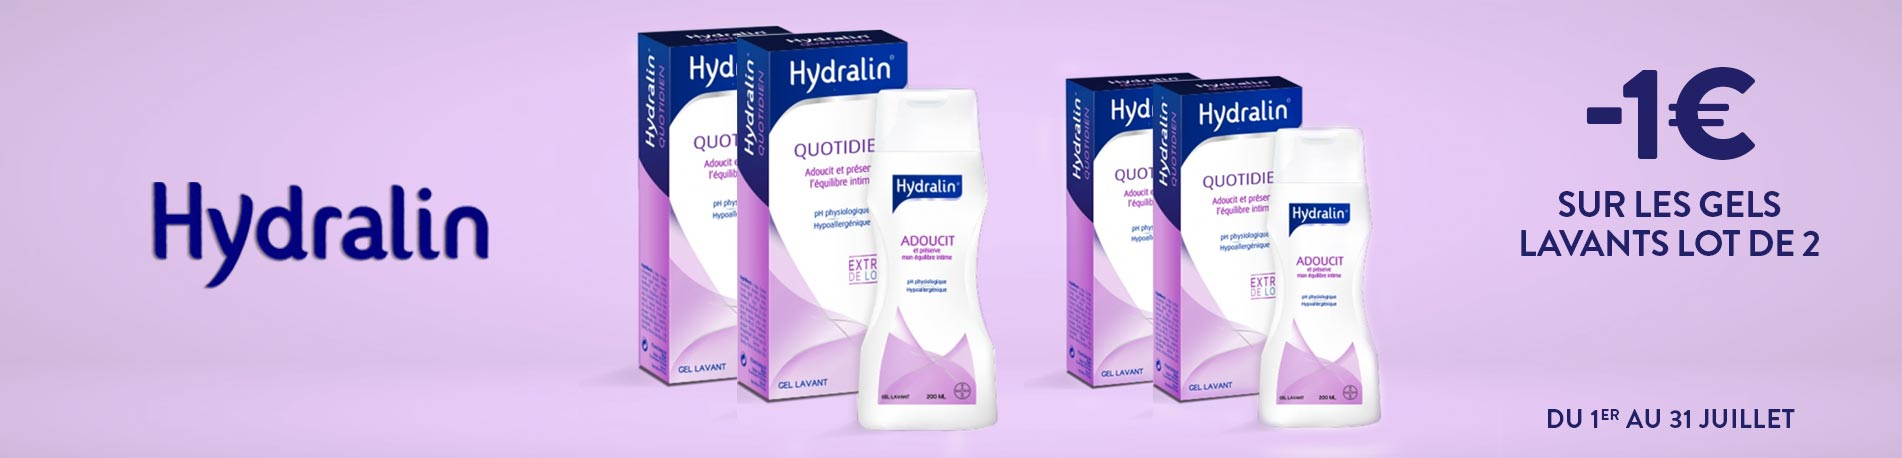 Promotion Hydralin